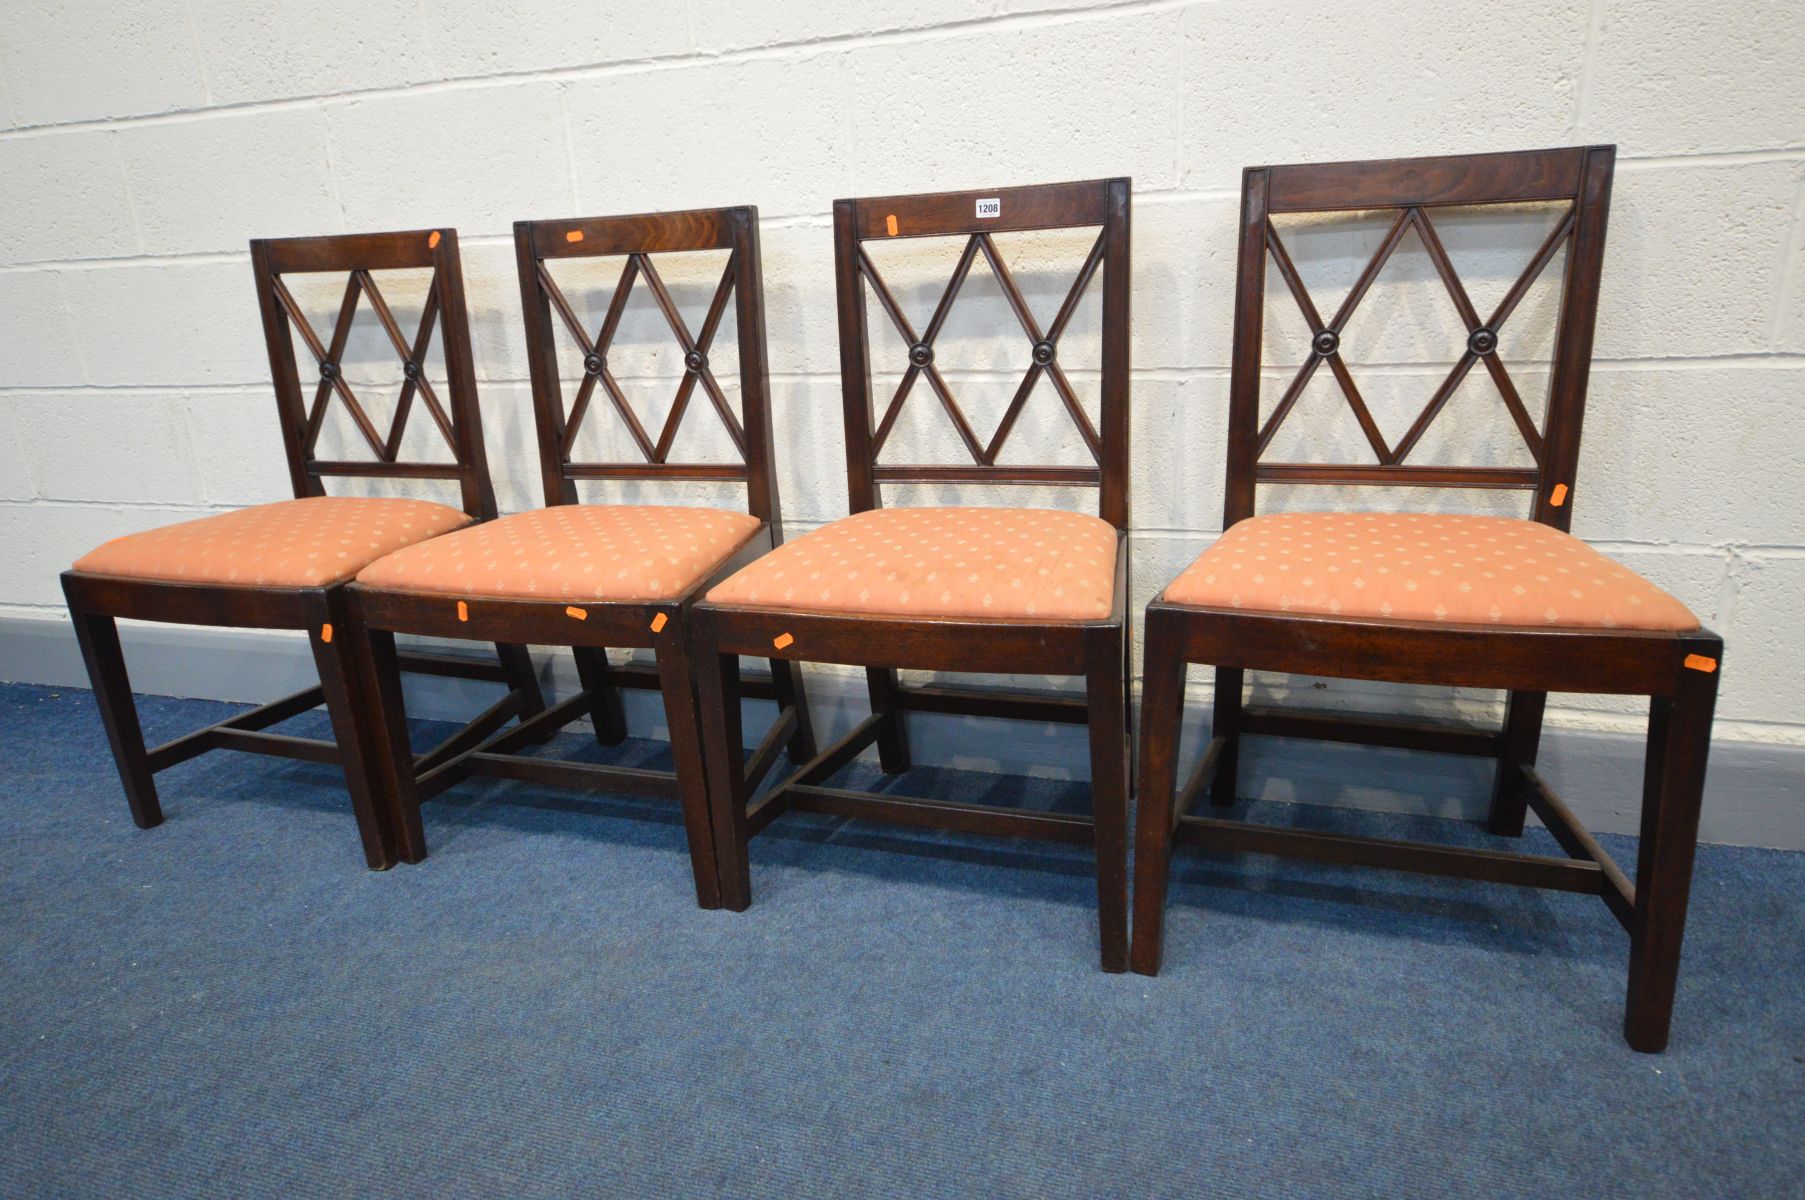 A SET OF FOUR GEORGIAN LATTICE BACK CHAIRS, with pink upholstered inserts - Image 3 of 3